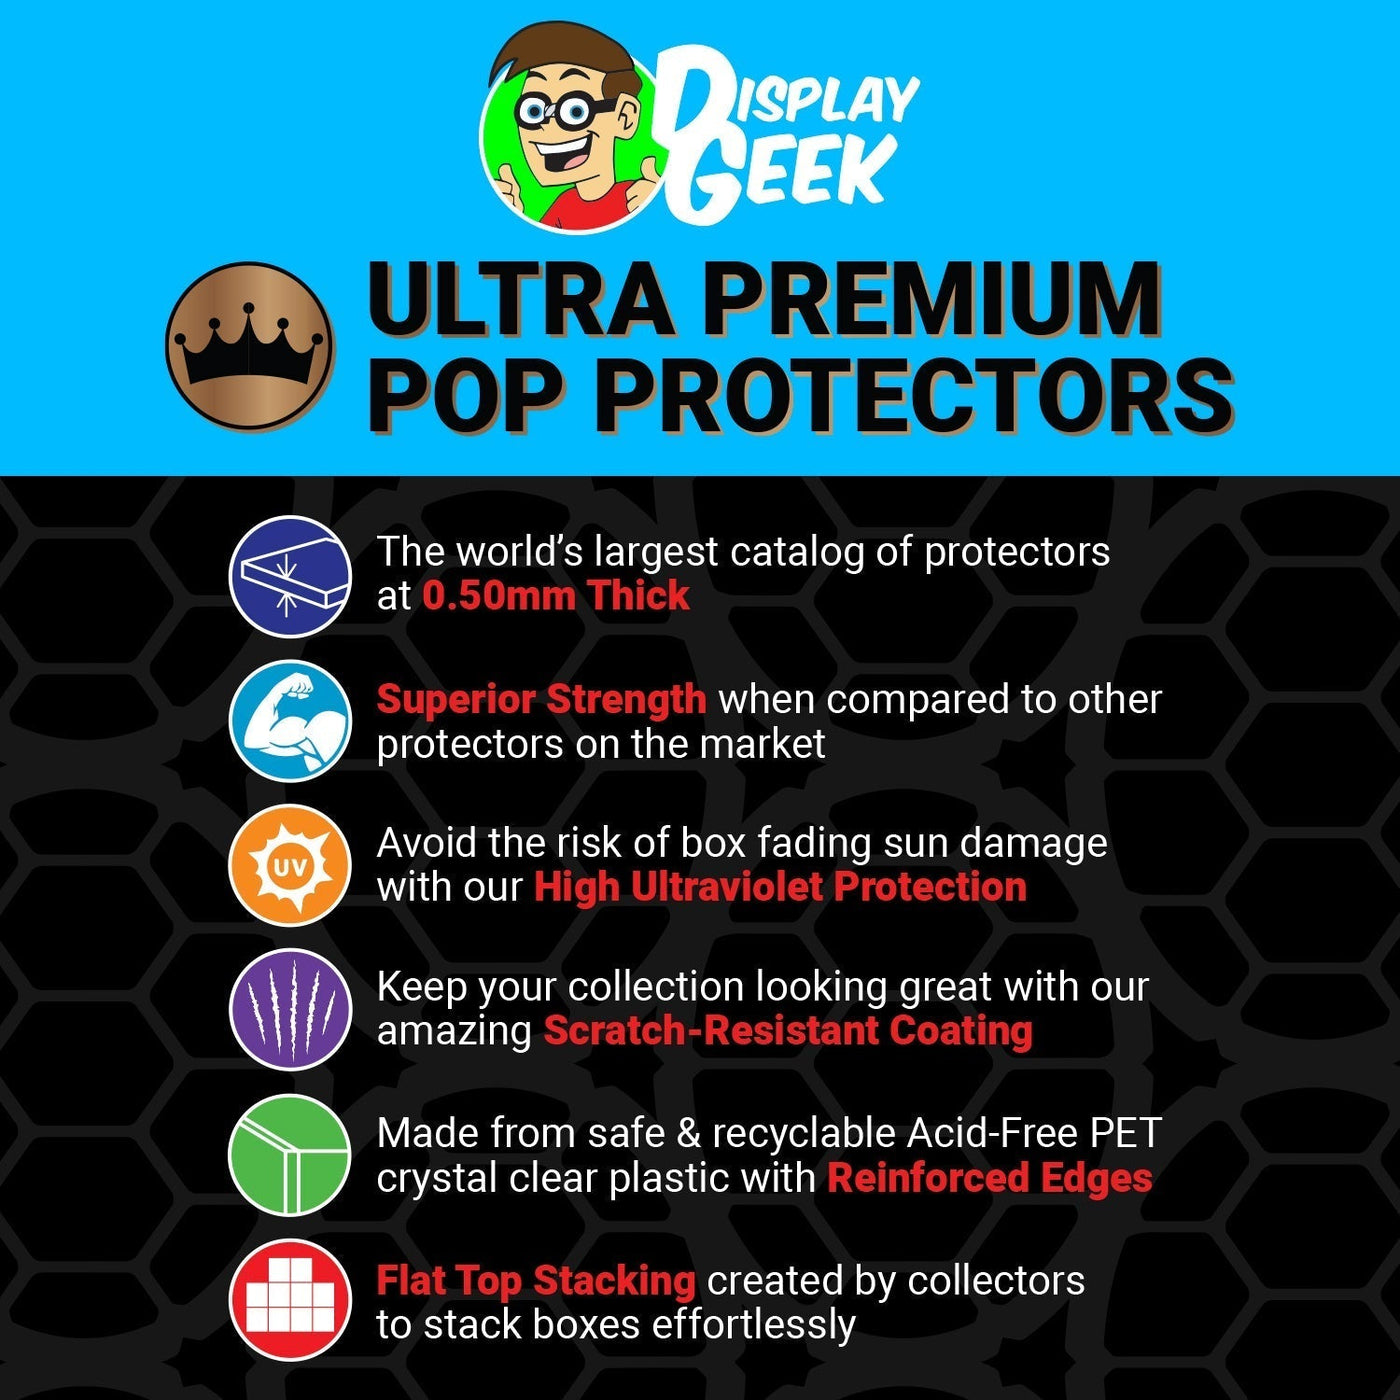 Pop Protector for Vynl 2 Pack Darth Vader & Stormtrooper Funko on The Protector Guide App by Display Geek